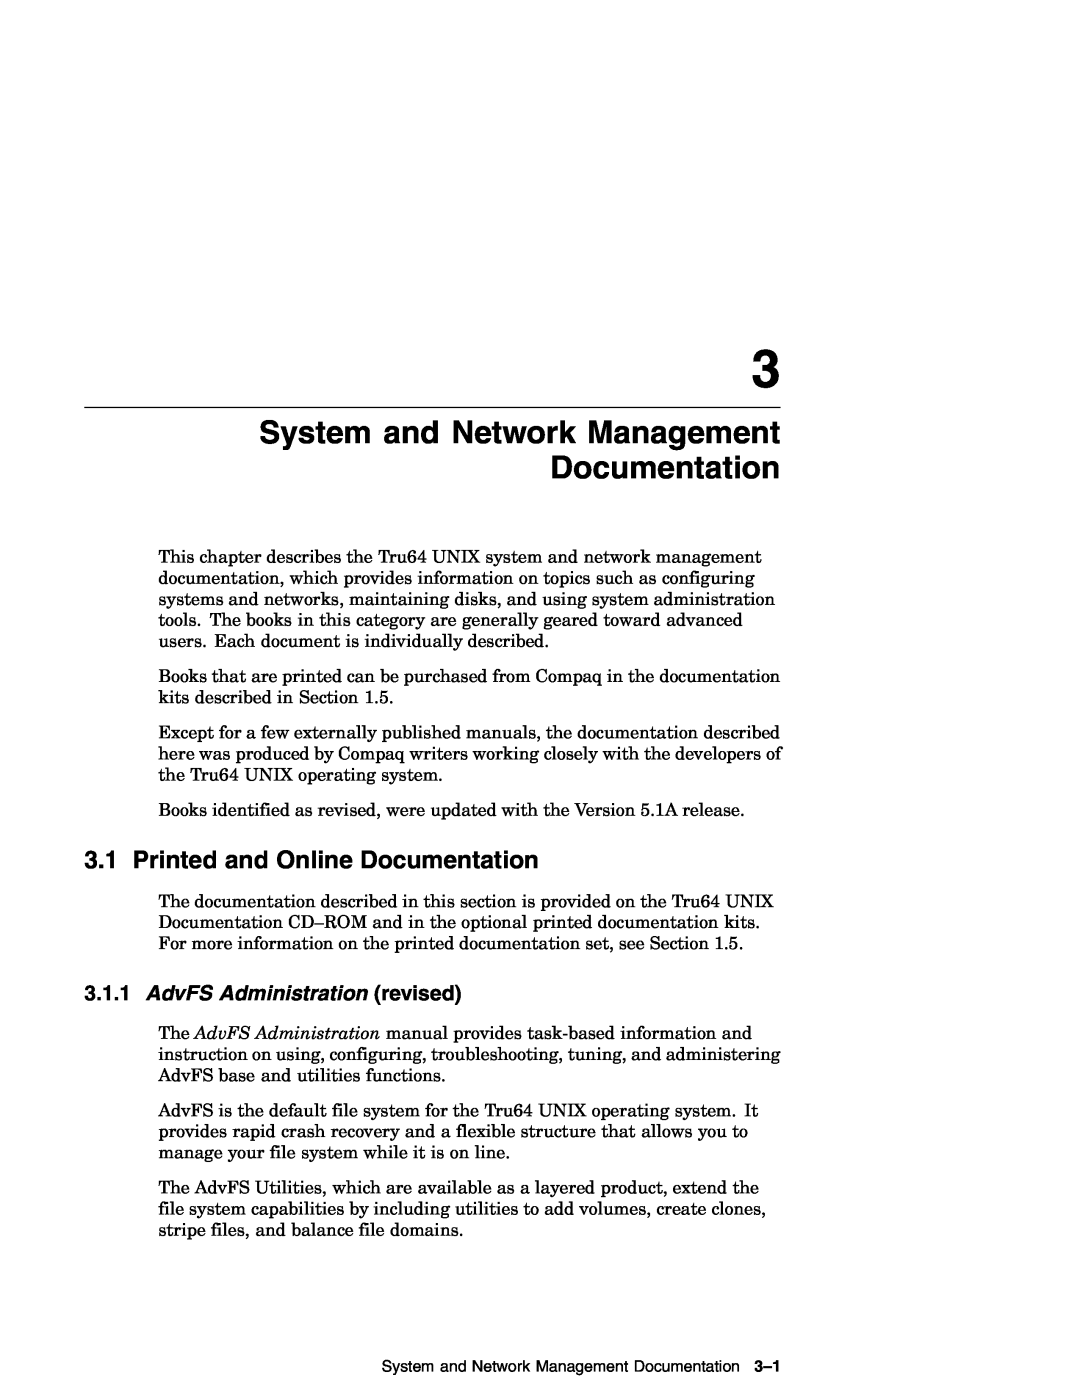 Compaq AA-RH8RD-TE manual System and Network Management Documentation, Printed and Online Documentation 